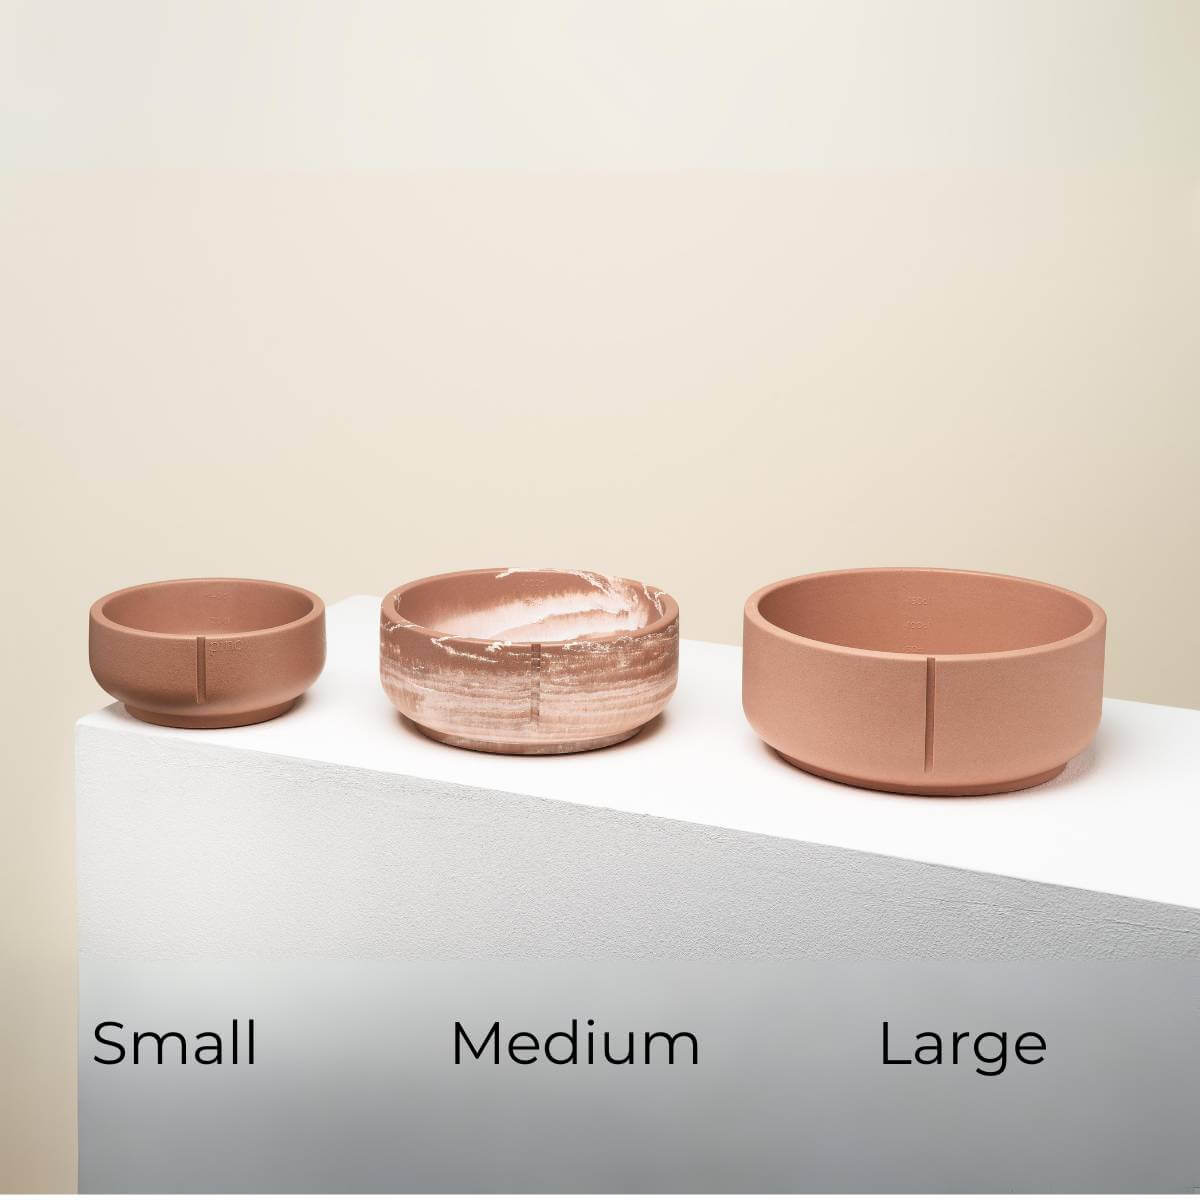 The diffrent sizes of the bowls in Foxy Terra color